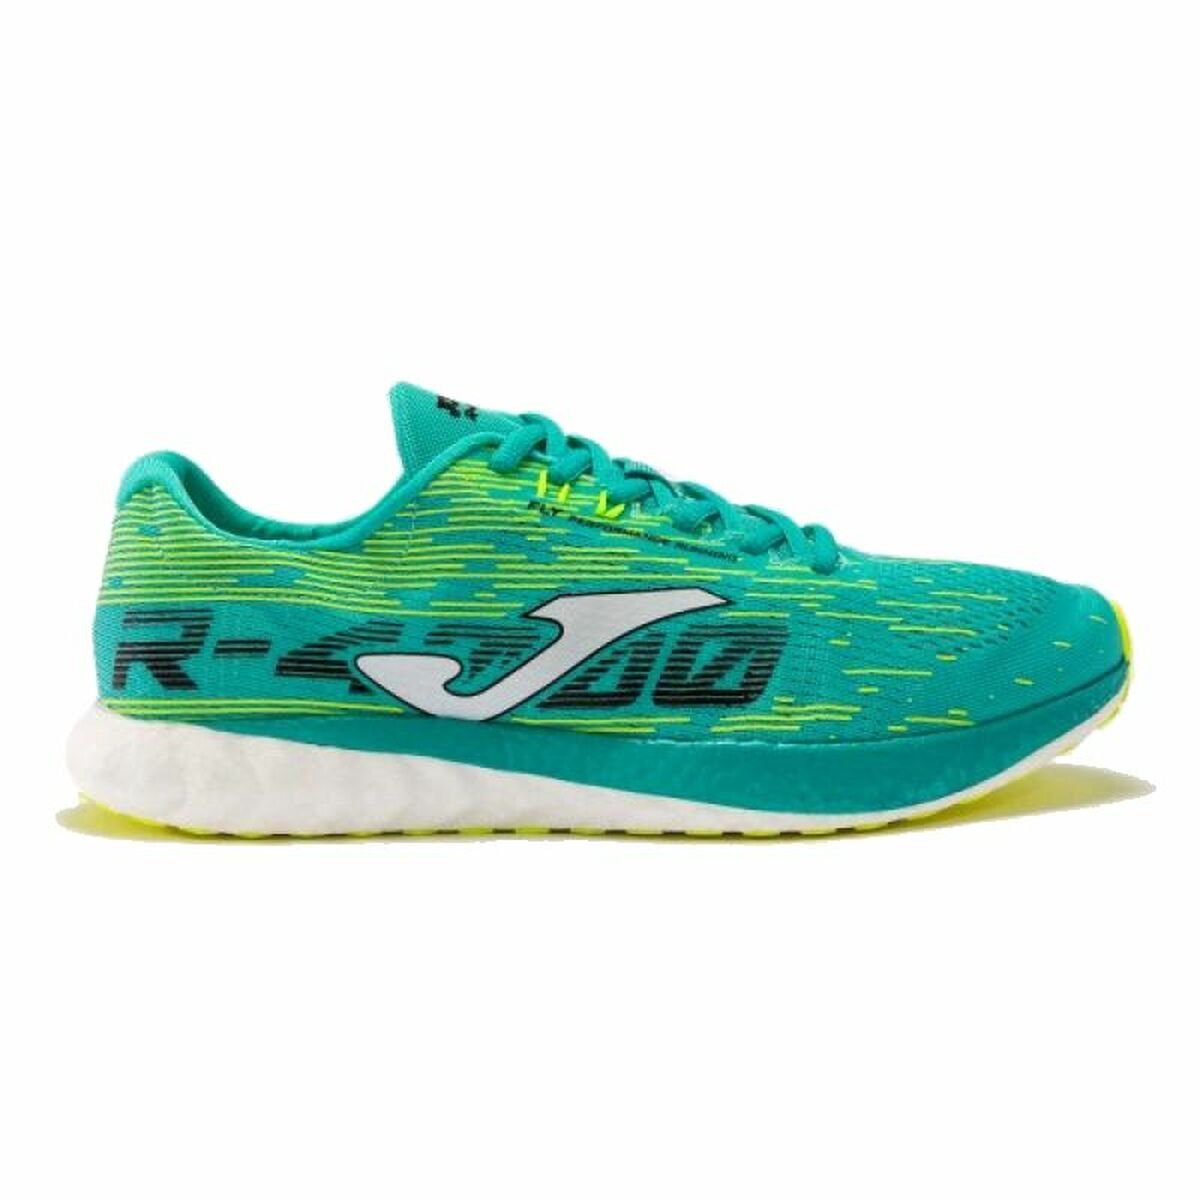 Chaussures de Running pour Adultes Joma Sport R.4000 Turquoise Homme